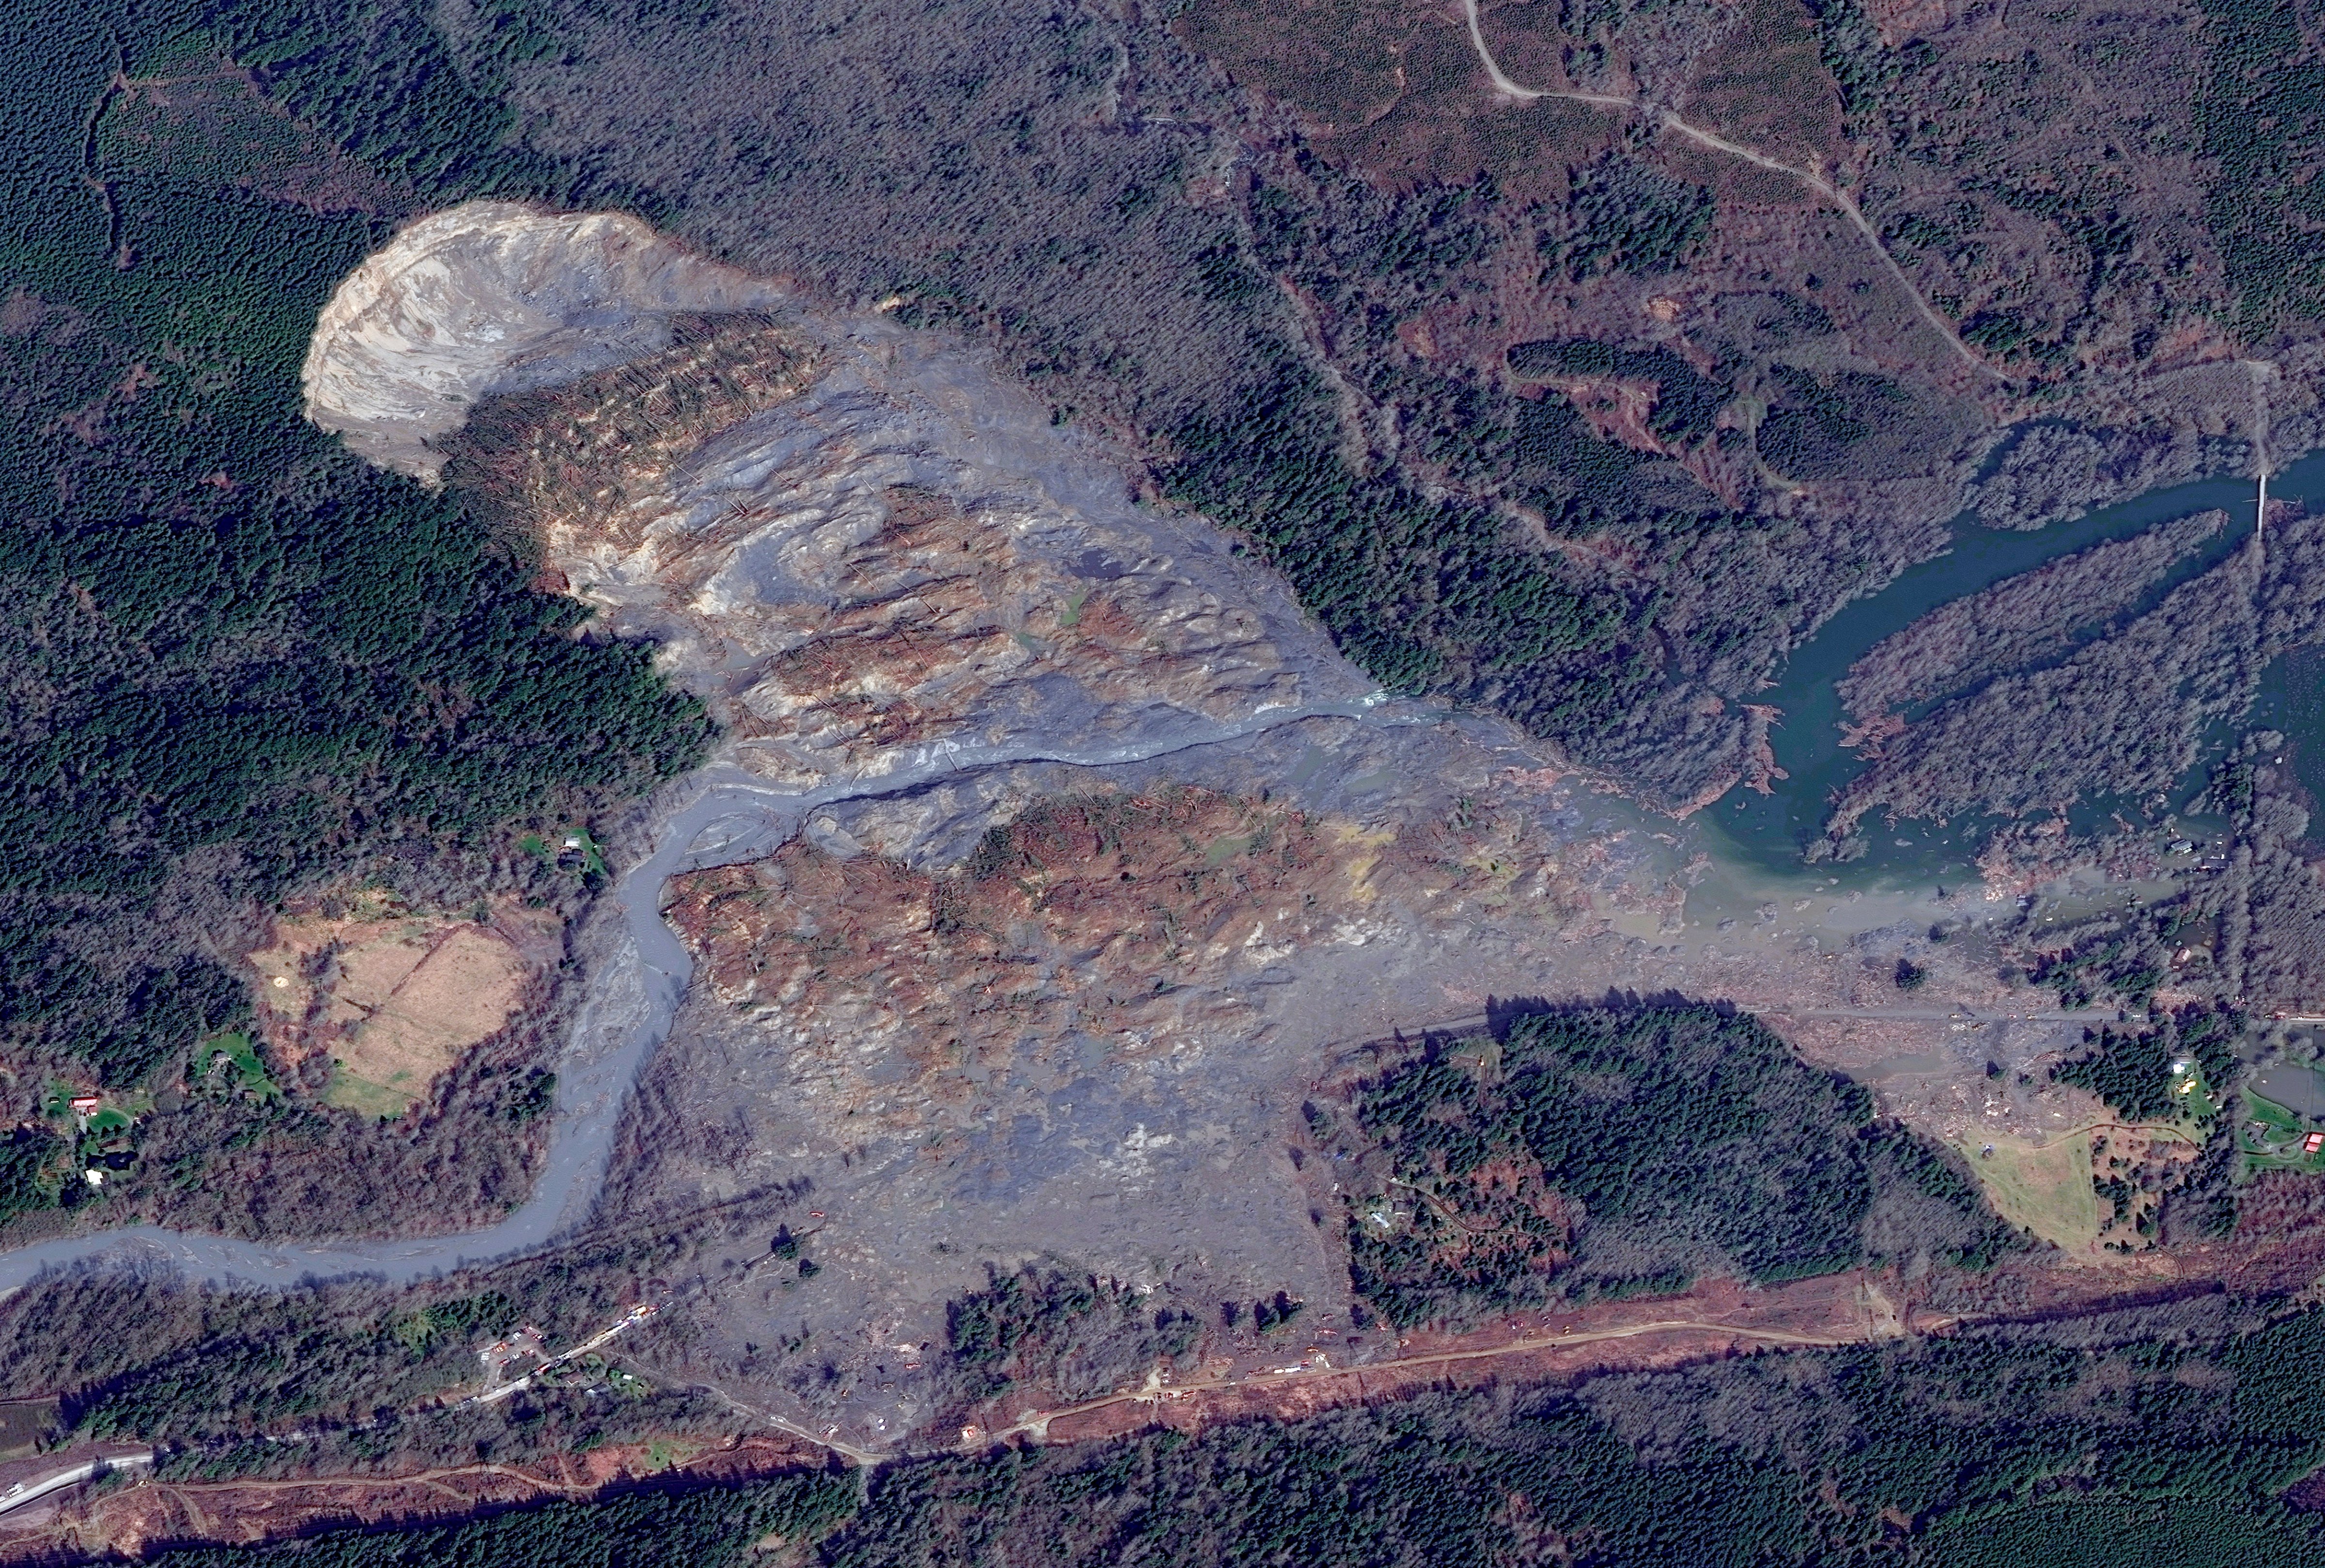 A DigitalGlobe close-up satellite imagery of the Oso, Washington mudslide area after the March 2014 tragedy.  Imagery collected on March 31st, 2014. (DigitalGlobe/Getty Images)